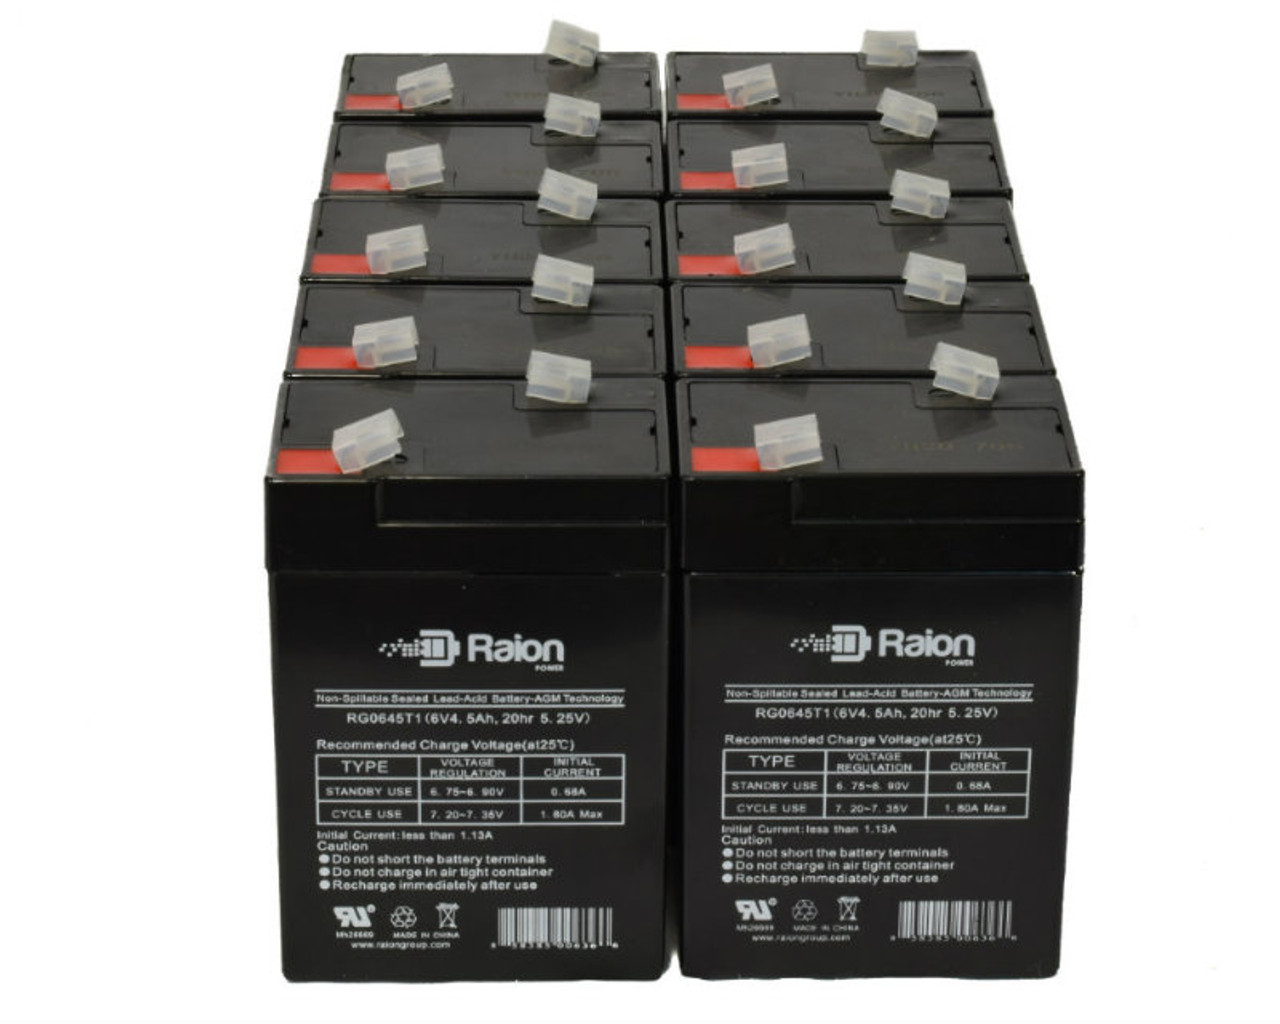 Raion Power 6V 4.5Ah Replacement Emergency Light Battery for Dual-Lite 12-295 / 12295 / 0120295 - 10 Pack